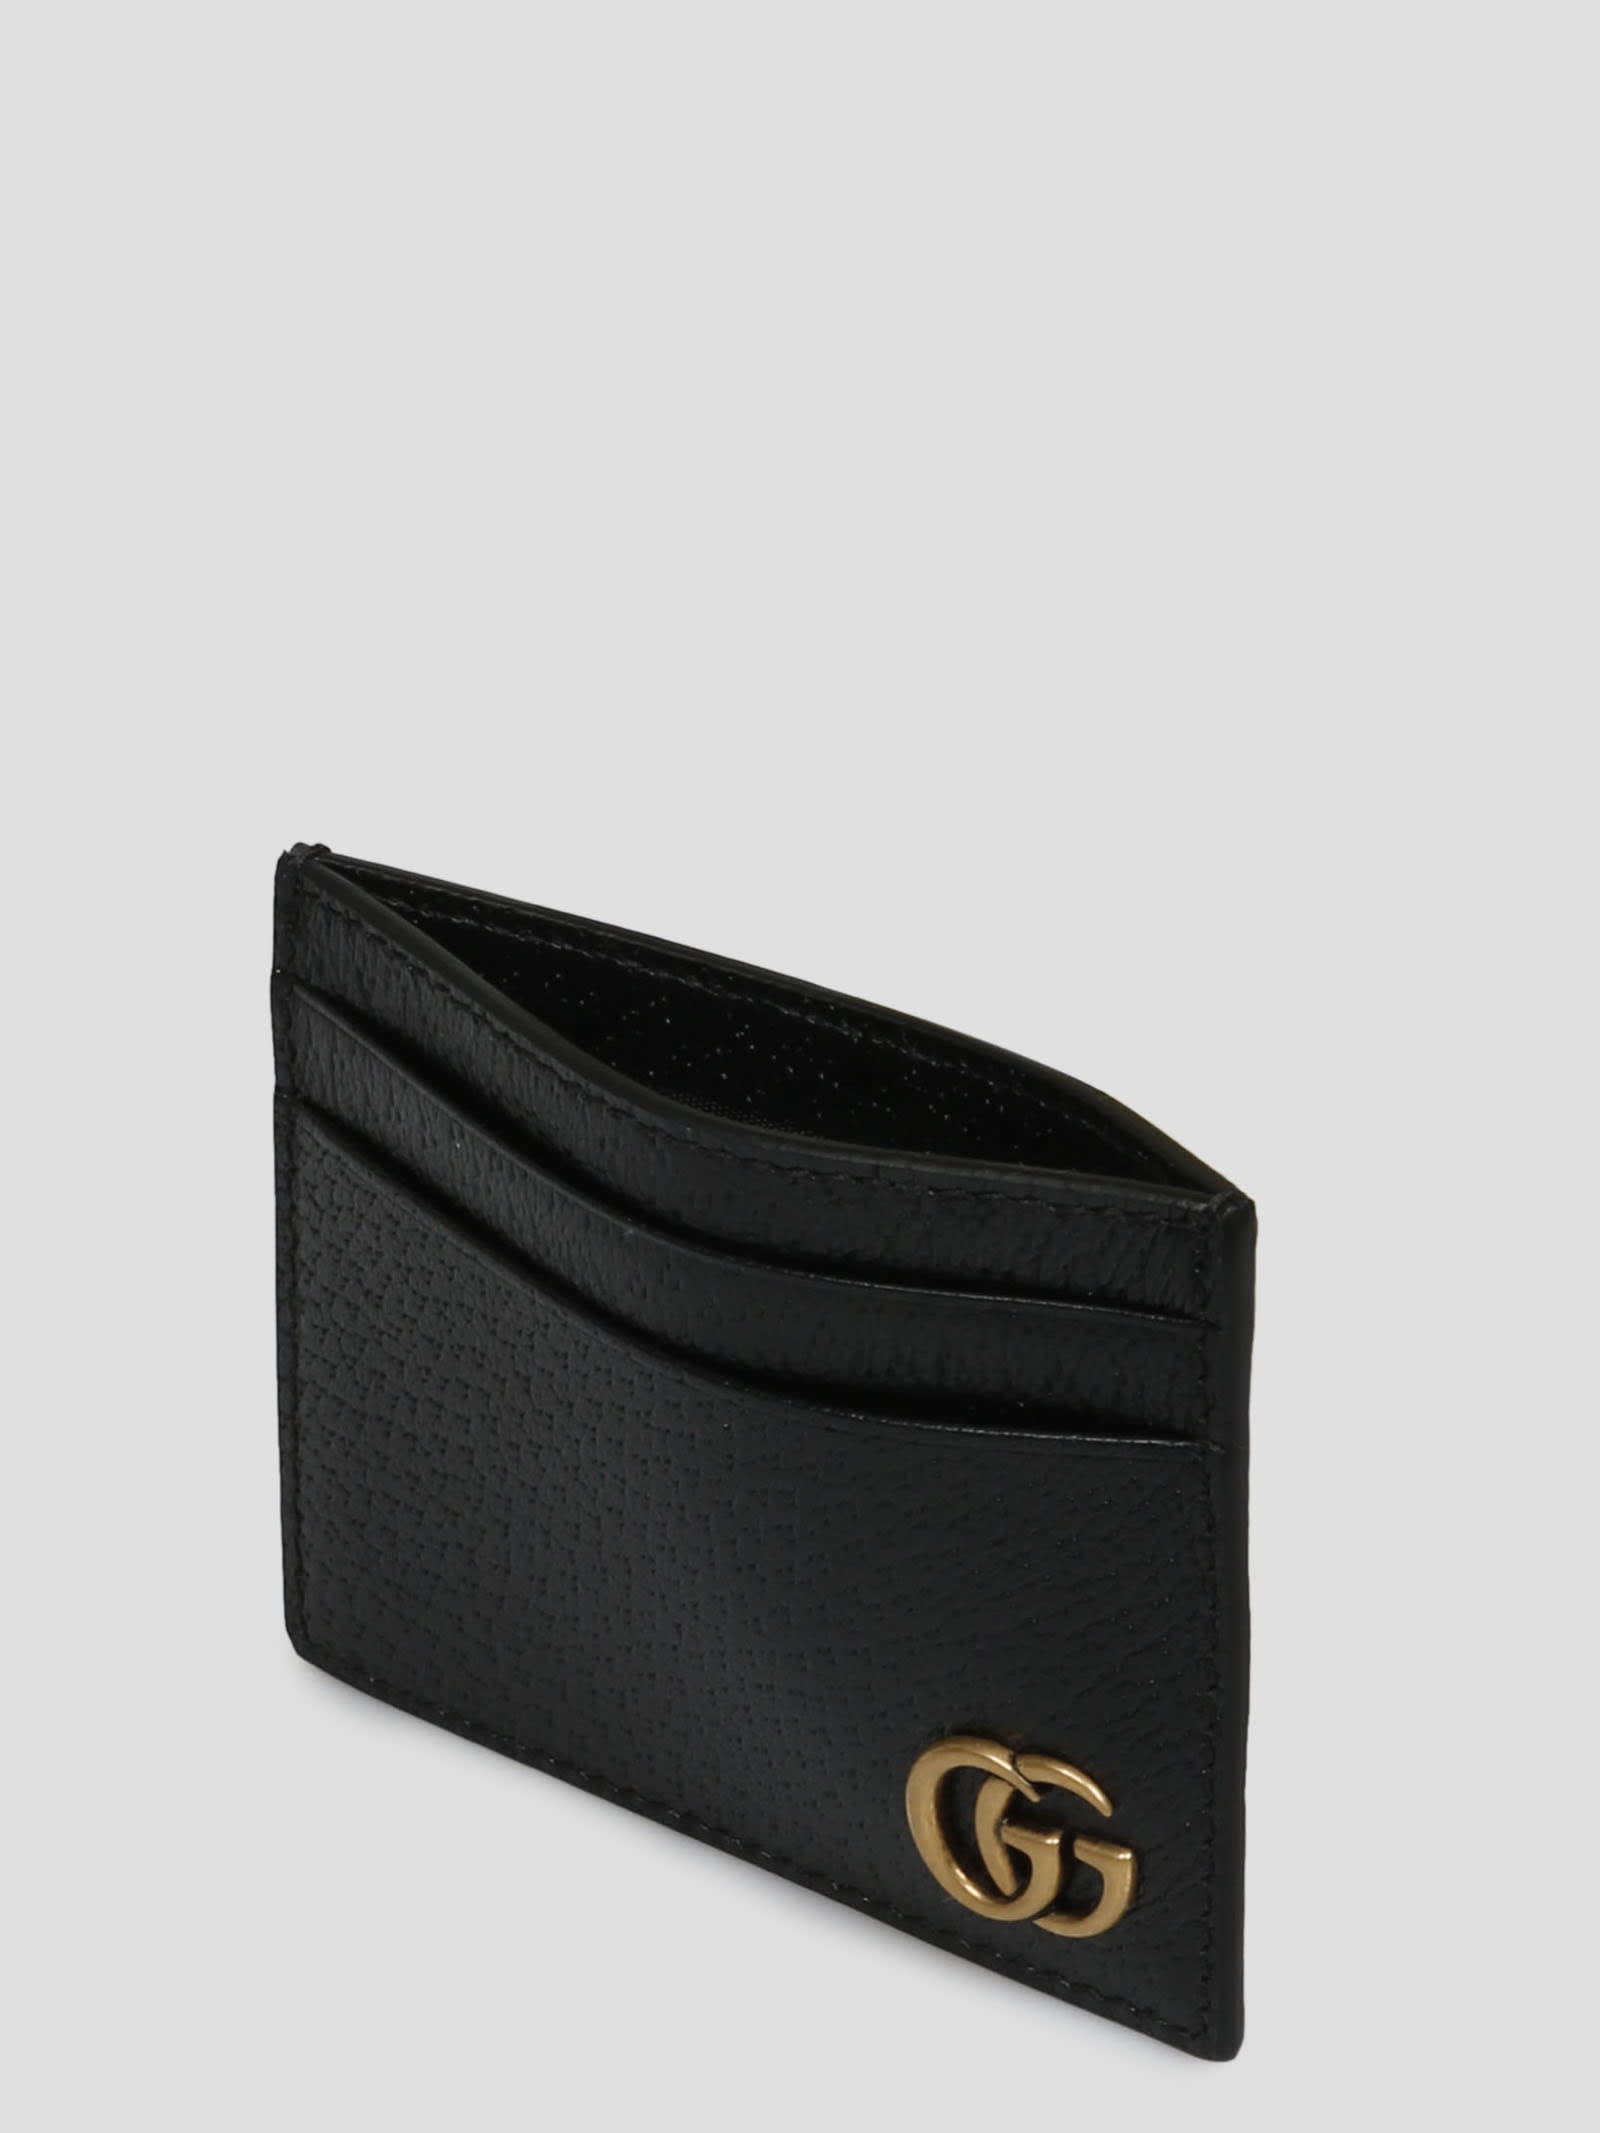 Gucci Leather Money Clip Wallet - Black Wallets, Accessories - GUC223573